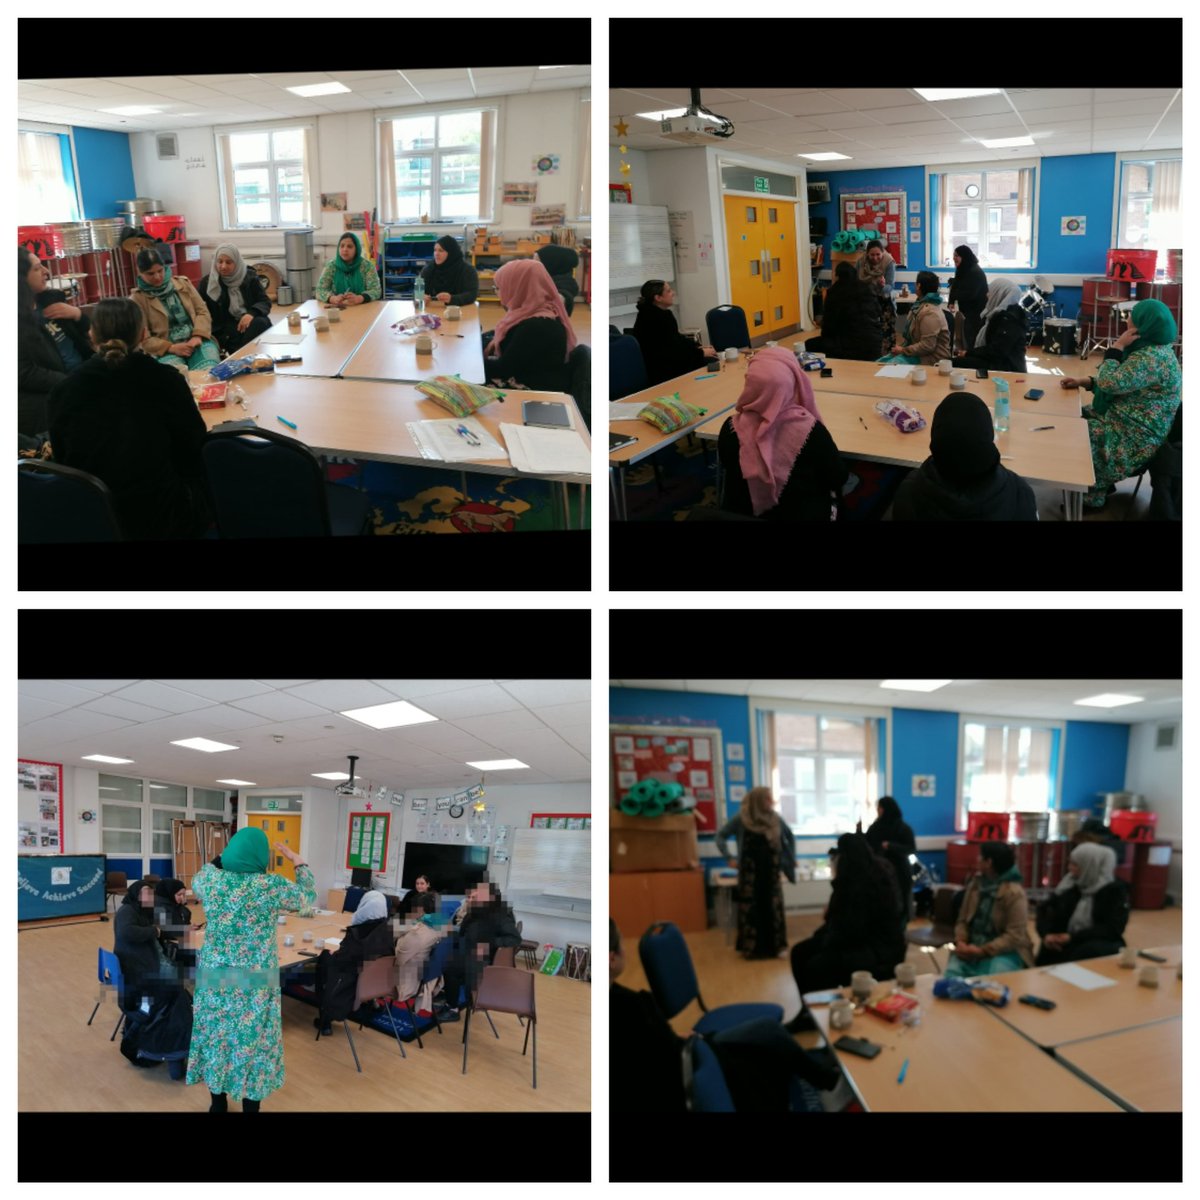 Excellent workshops @Greenhill_HT CHAI, discussions & focus groups with our school staff #parentalengagement #parentalvoice. Also we have started our #health equality prgram kicking off with role plays on #wellbeing. These mums are super amazing 👏